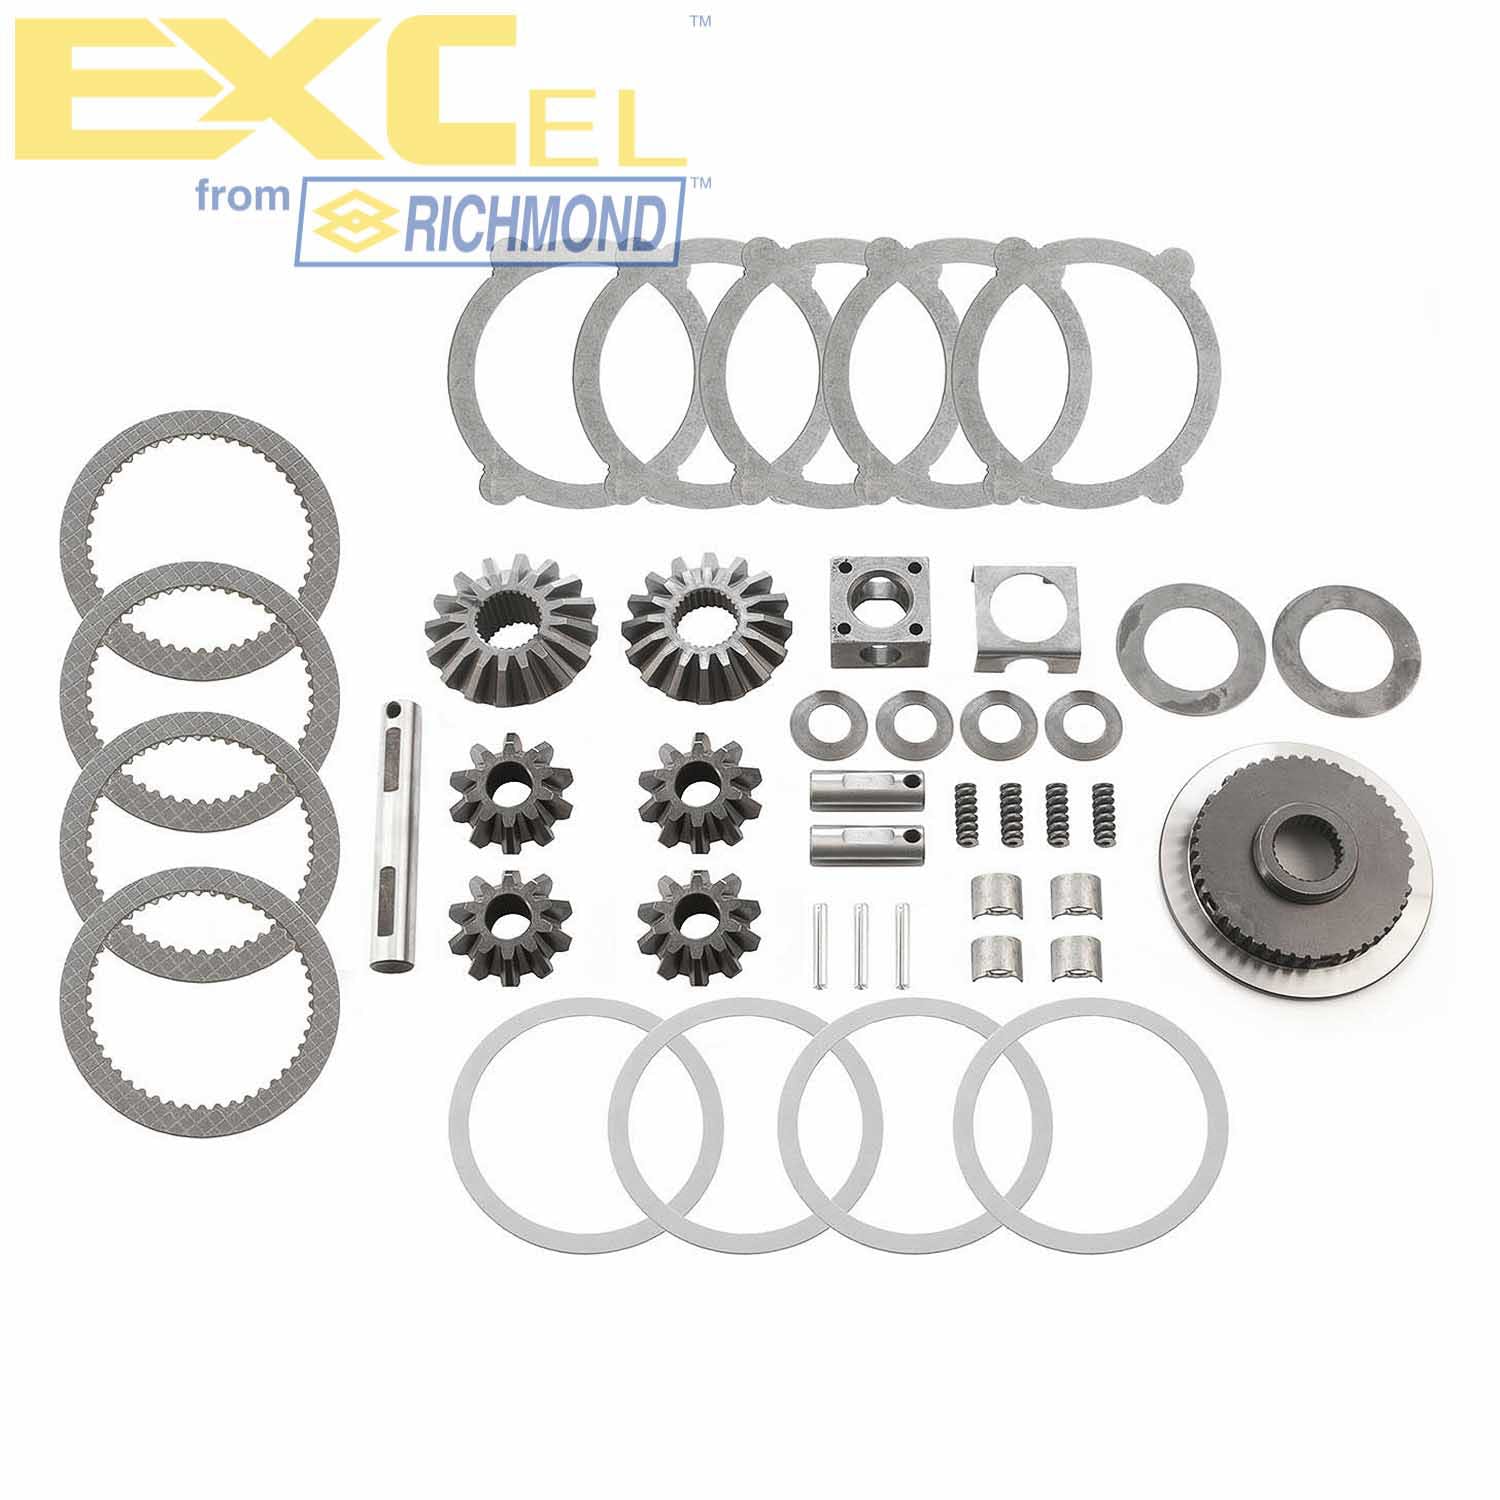 Excel XL-4032 Differential Carrier Gear Kit